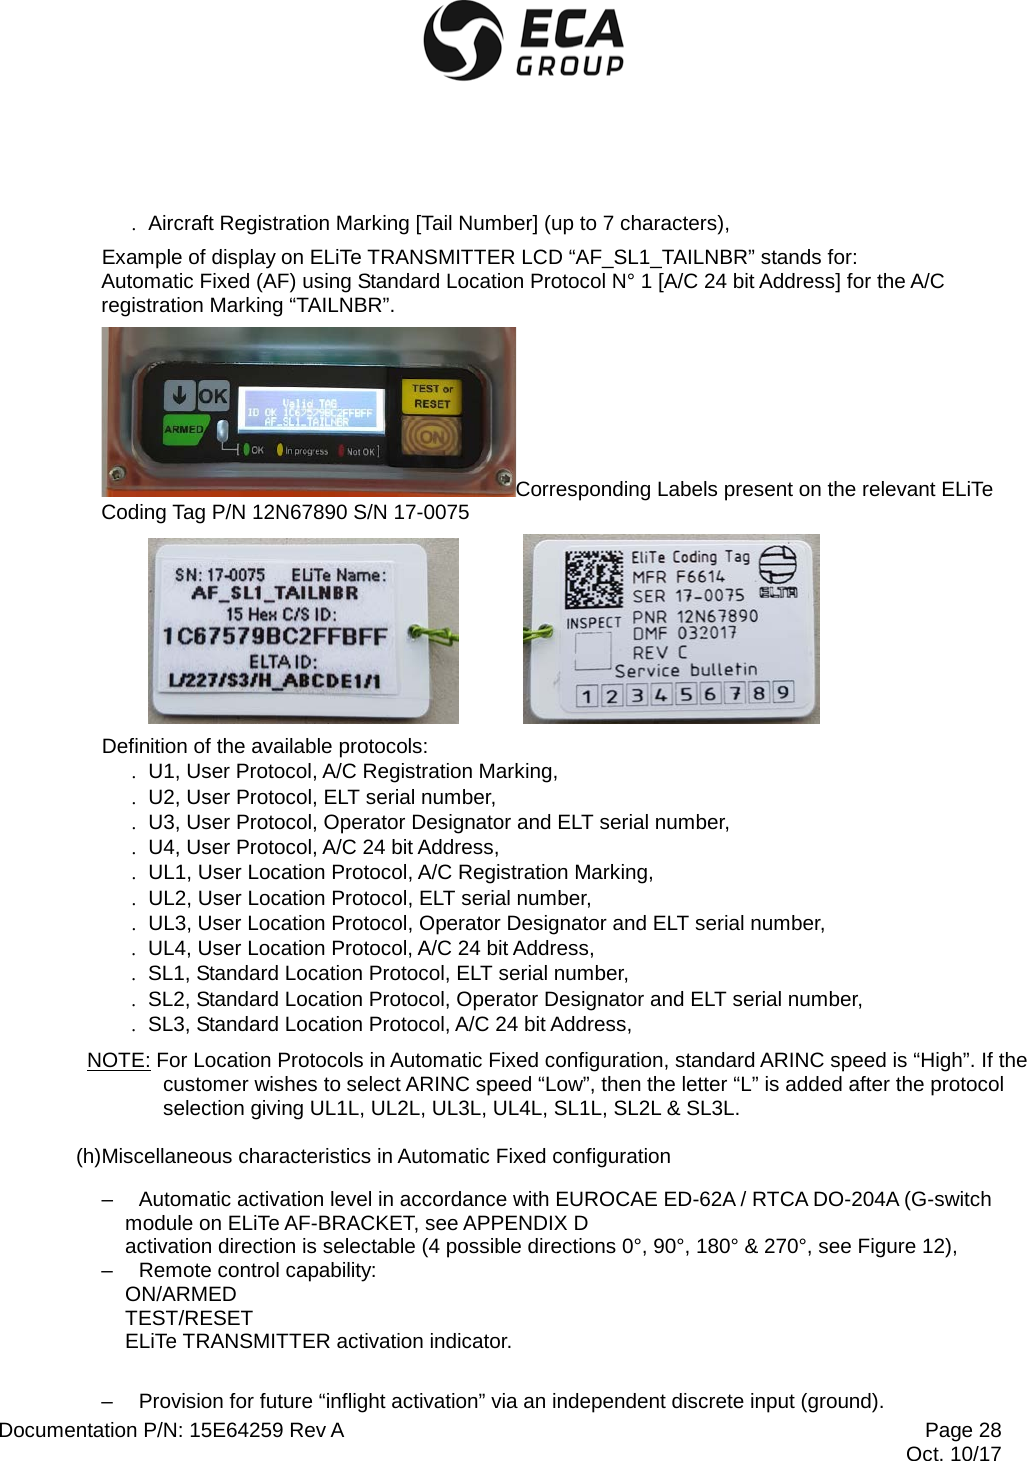  Documentation P/N: 15E64259 Rev A Page 28  Oct. 10/17 . Aircraft Registration Marking [Tail Number] (up to 7 characters), Example of display on ELiTe TRANSMITTER LCD “AF_SL1_TAILNBR” stands for: Automatic Fixed (AF) using Standard Location Protocol N° 1 [A/C 24 bit Address] for the A/C registration Marking “TAILNBR”. Corresponding Labels present on the relevant ELiTe Coding Tag P/N 12N67890 S/N 17-0075     Definition of the available protocols: . U1, User Protocol, A/C Registration Marking, . U2, User Protocol, ELT serial number, . U3, User Protocol, Operator Designator and ELT serial number, . U4, User Protocol, A/C 24 bit Address, . UL1, User Location Protocol, A/C Registration Marking, . UL2, User Location Protocol, ELT serial number, . UL3, User Location Protocol, Operator Designator and ELT serial number, . UL4, User Location Protocol, A/C 24 bit Address, . SL1, Standard Location Protocol, ELT serial number, . SL2, Standard Location Protocol, Operator Designator and ELT serial number, . SL3, Standard Location Protocol, A/C 24 bit Address, NOTE: For Location Protocols in Automatic Fixed configuration, standard ARINC speed is “High”. If the customer wishes to select ARINC speed “Low”, then the letter “L” is added after the protocol selection giving UL1L, UL2L, UL3L, UL4L, SL1L, SL2L &amp; SL3L. (h)Miscellaneous characteristics in Automatic Fixed configuration –  Automatic activation level in accordance with EUROCAE ED-62A / RTCA DO-204A (G-switch module on ELiTe AF-BRACKET, see APPENDIX D activation direction is selectable (4 possible directions 0°, 90°, 180° &amp; 270°, see Figure 12),  –  Remote control capability:  ON/ARMED TEST/RESET ELiTe TRANSMITTER activation indicator.  –  Provision for future “inflight activation” via an independent discrete input (ground). 